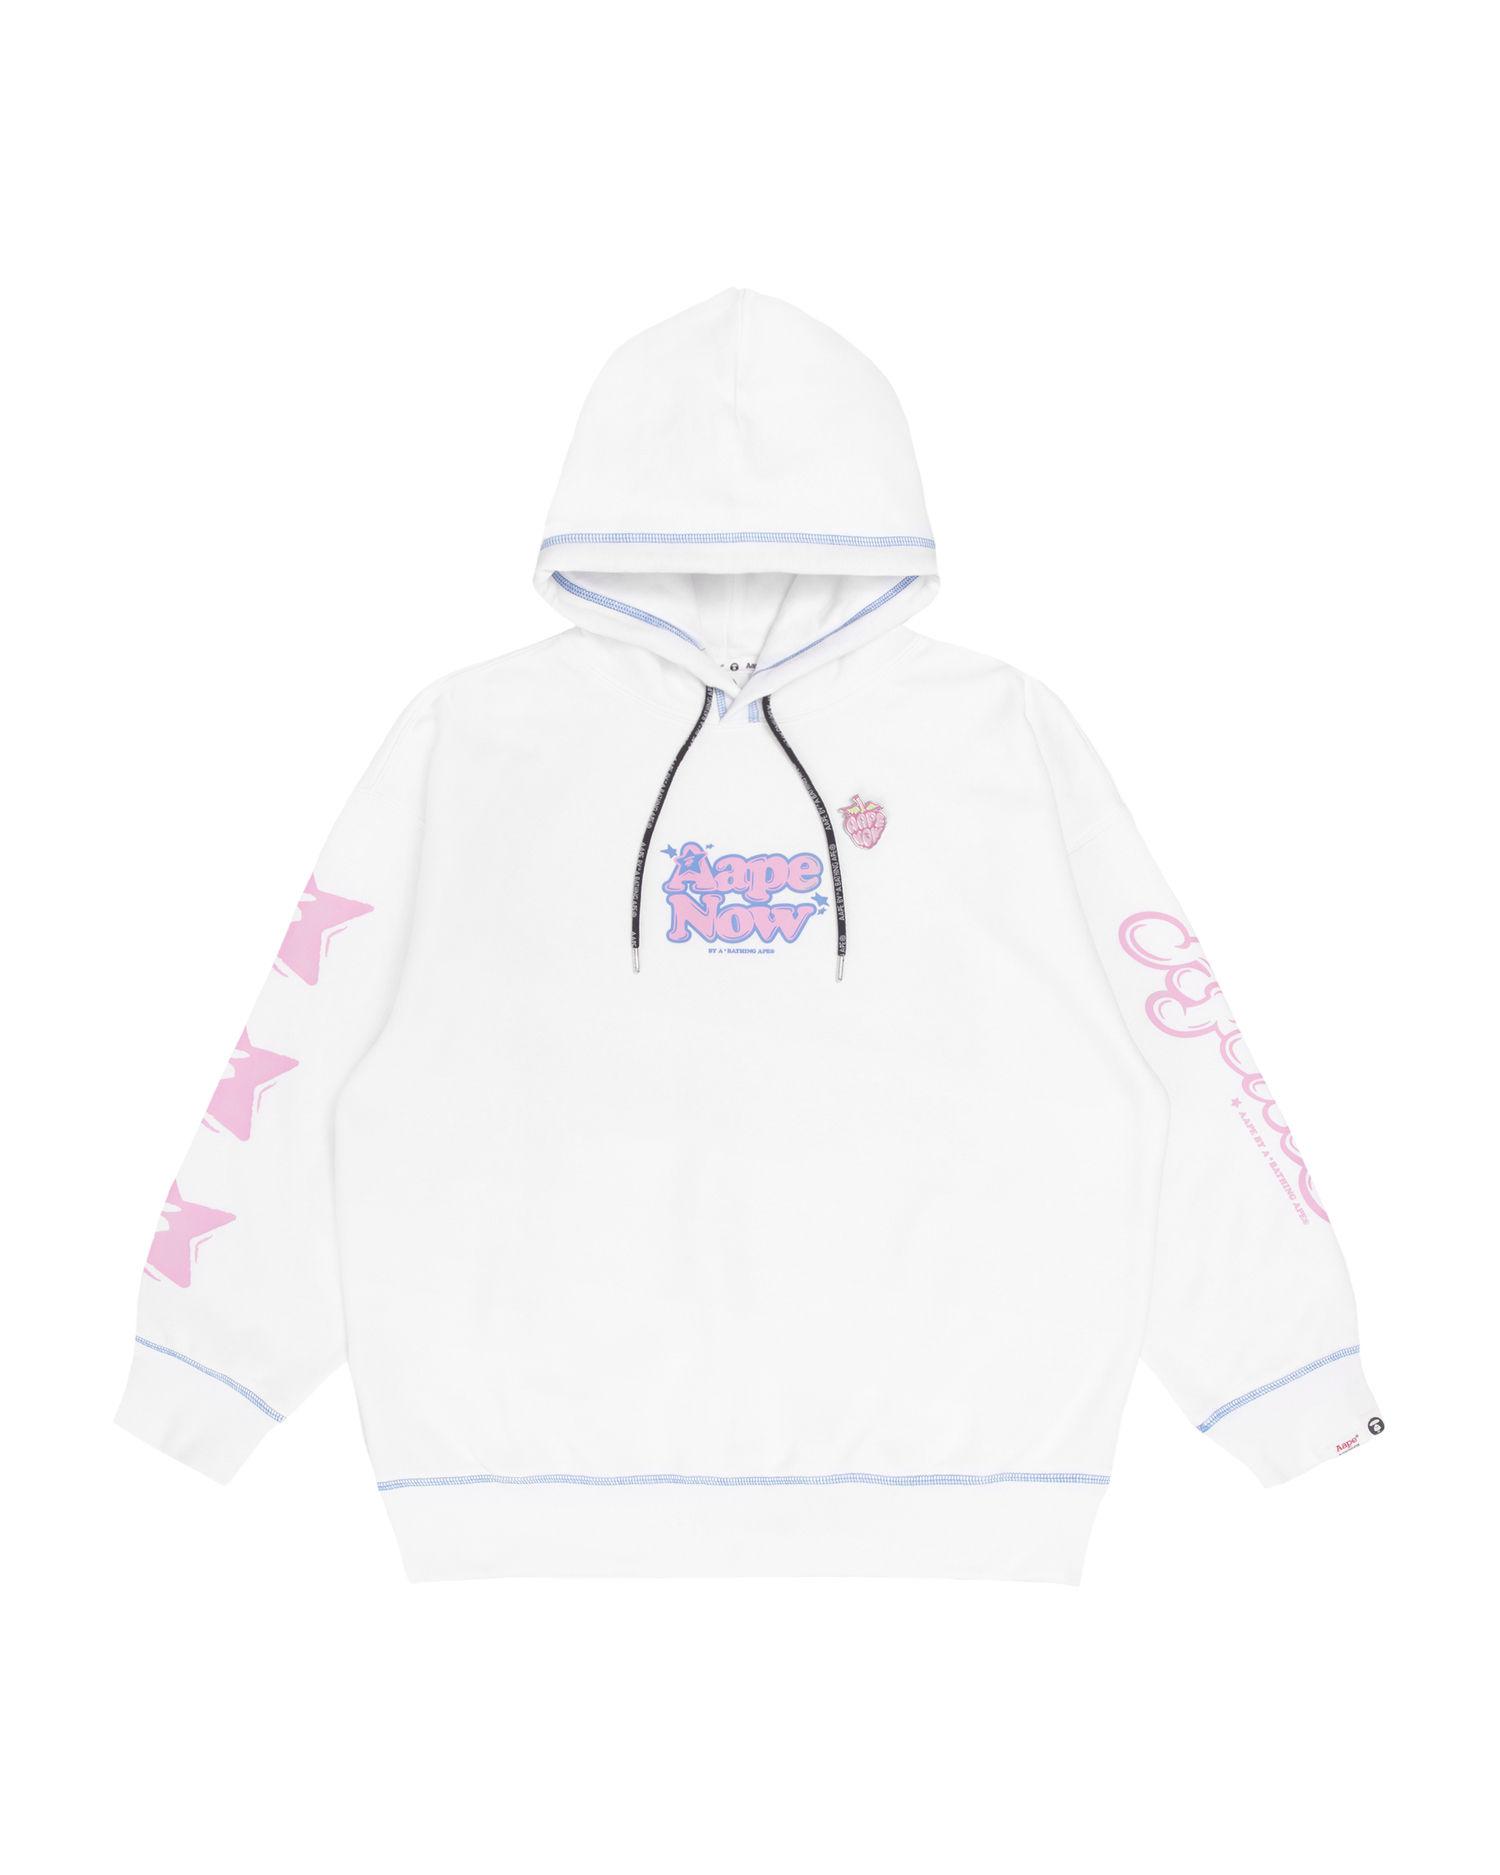 Moonface contrast stitch hoodie by AAPE